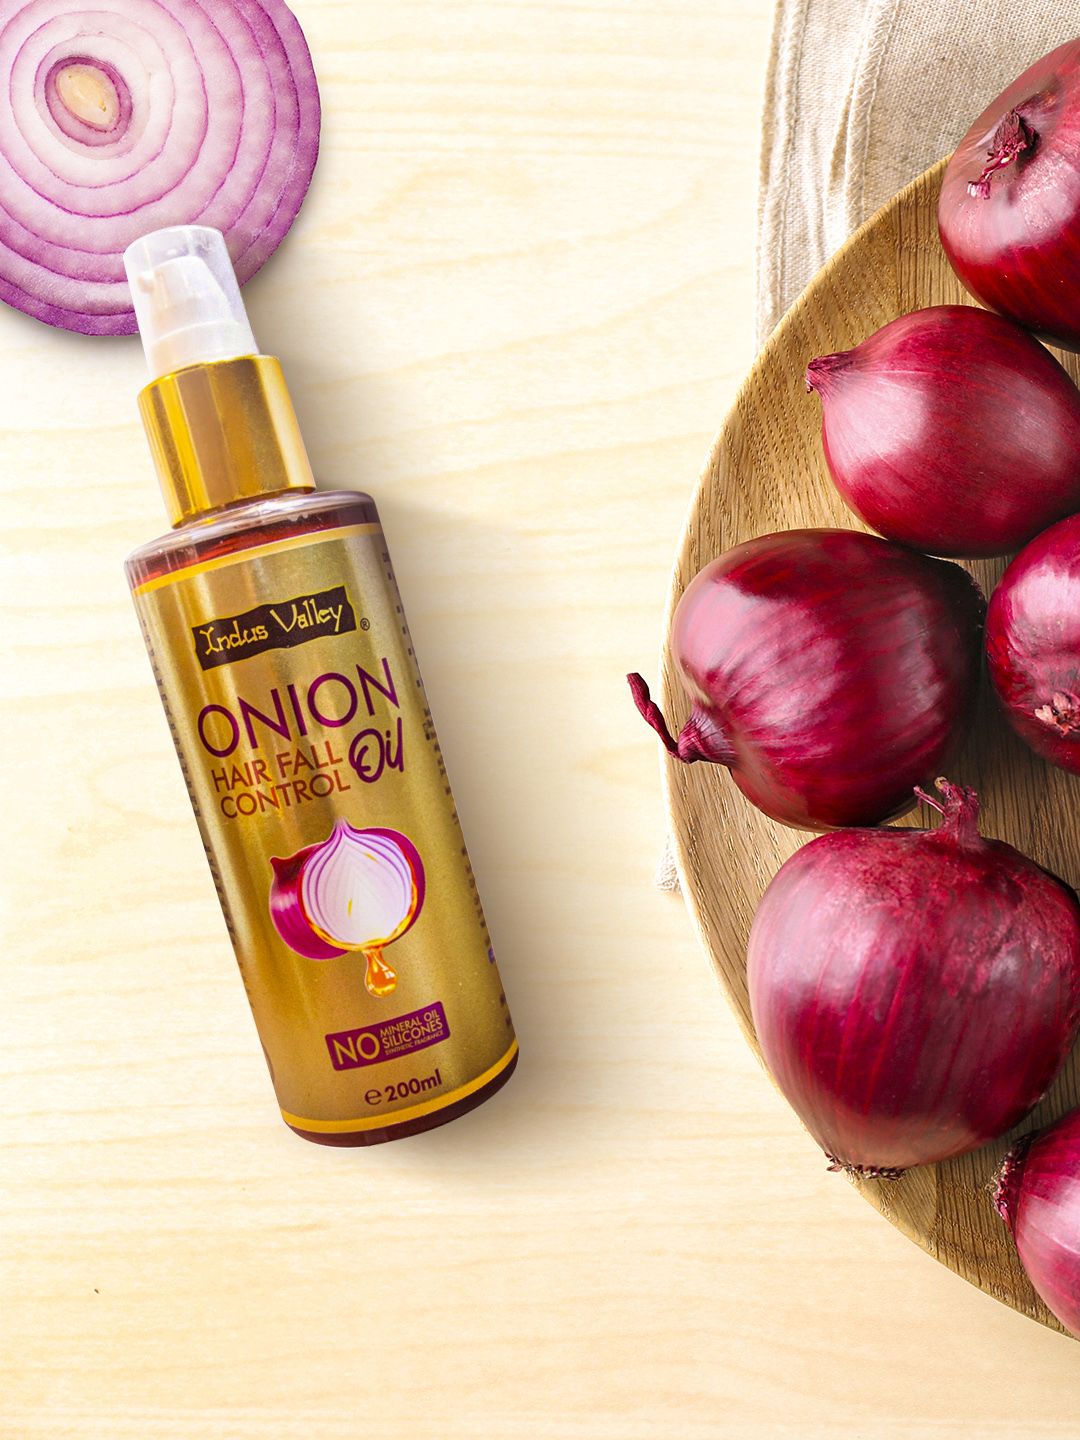 Indus Valley Onion Hair Fall Control Oil 200 ml Price in India